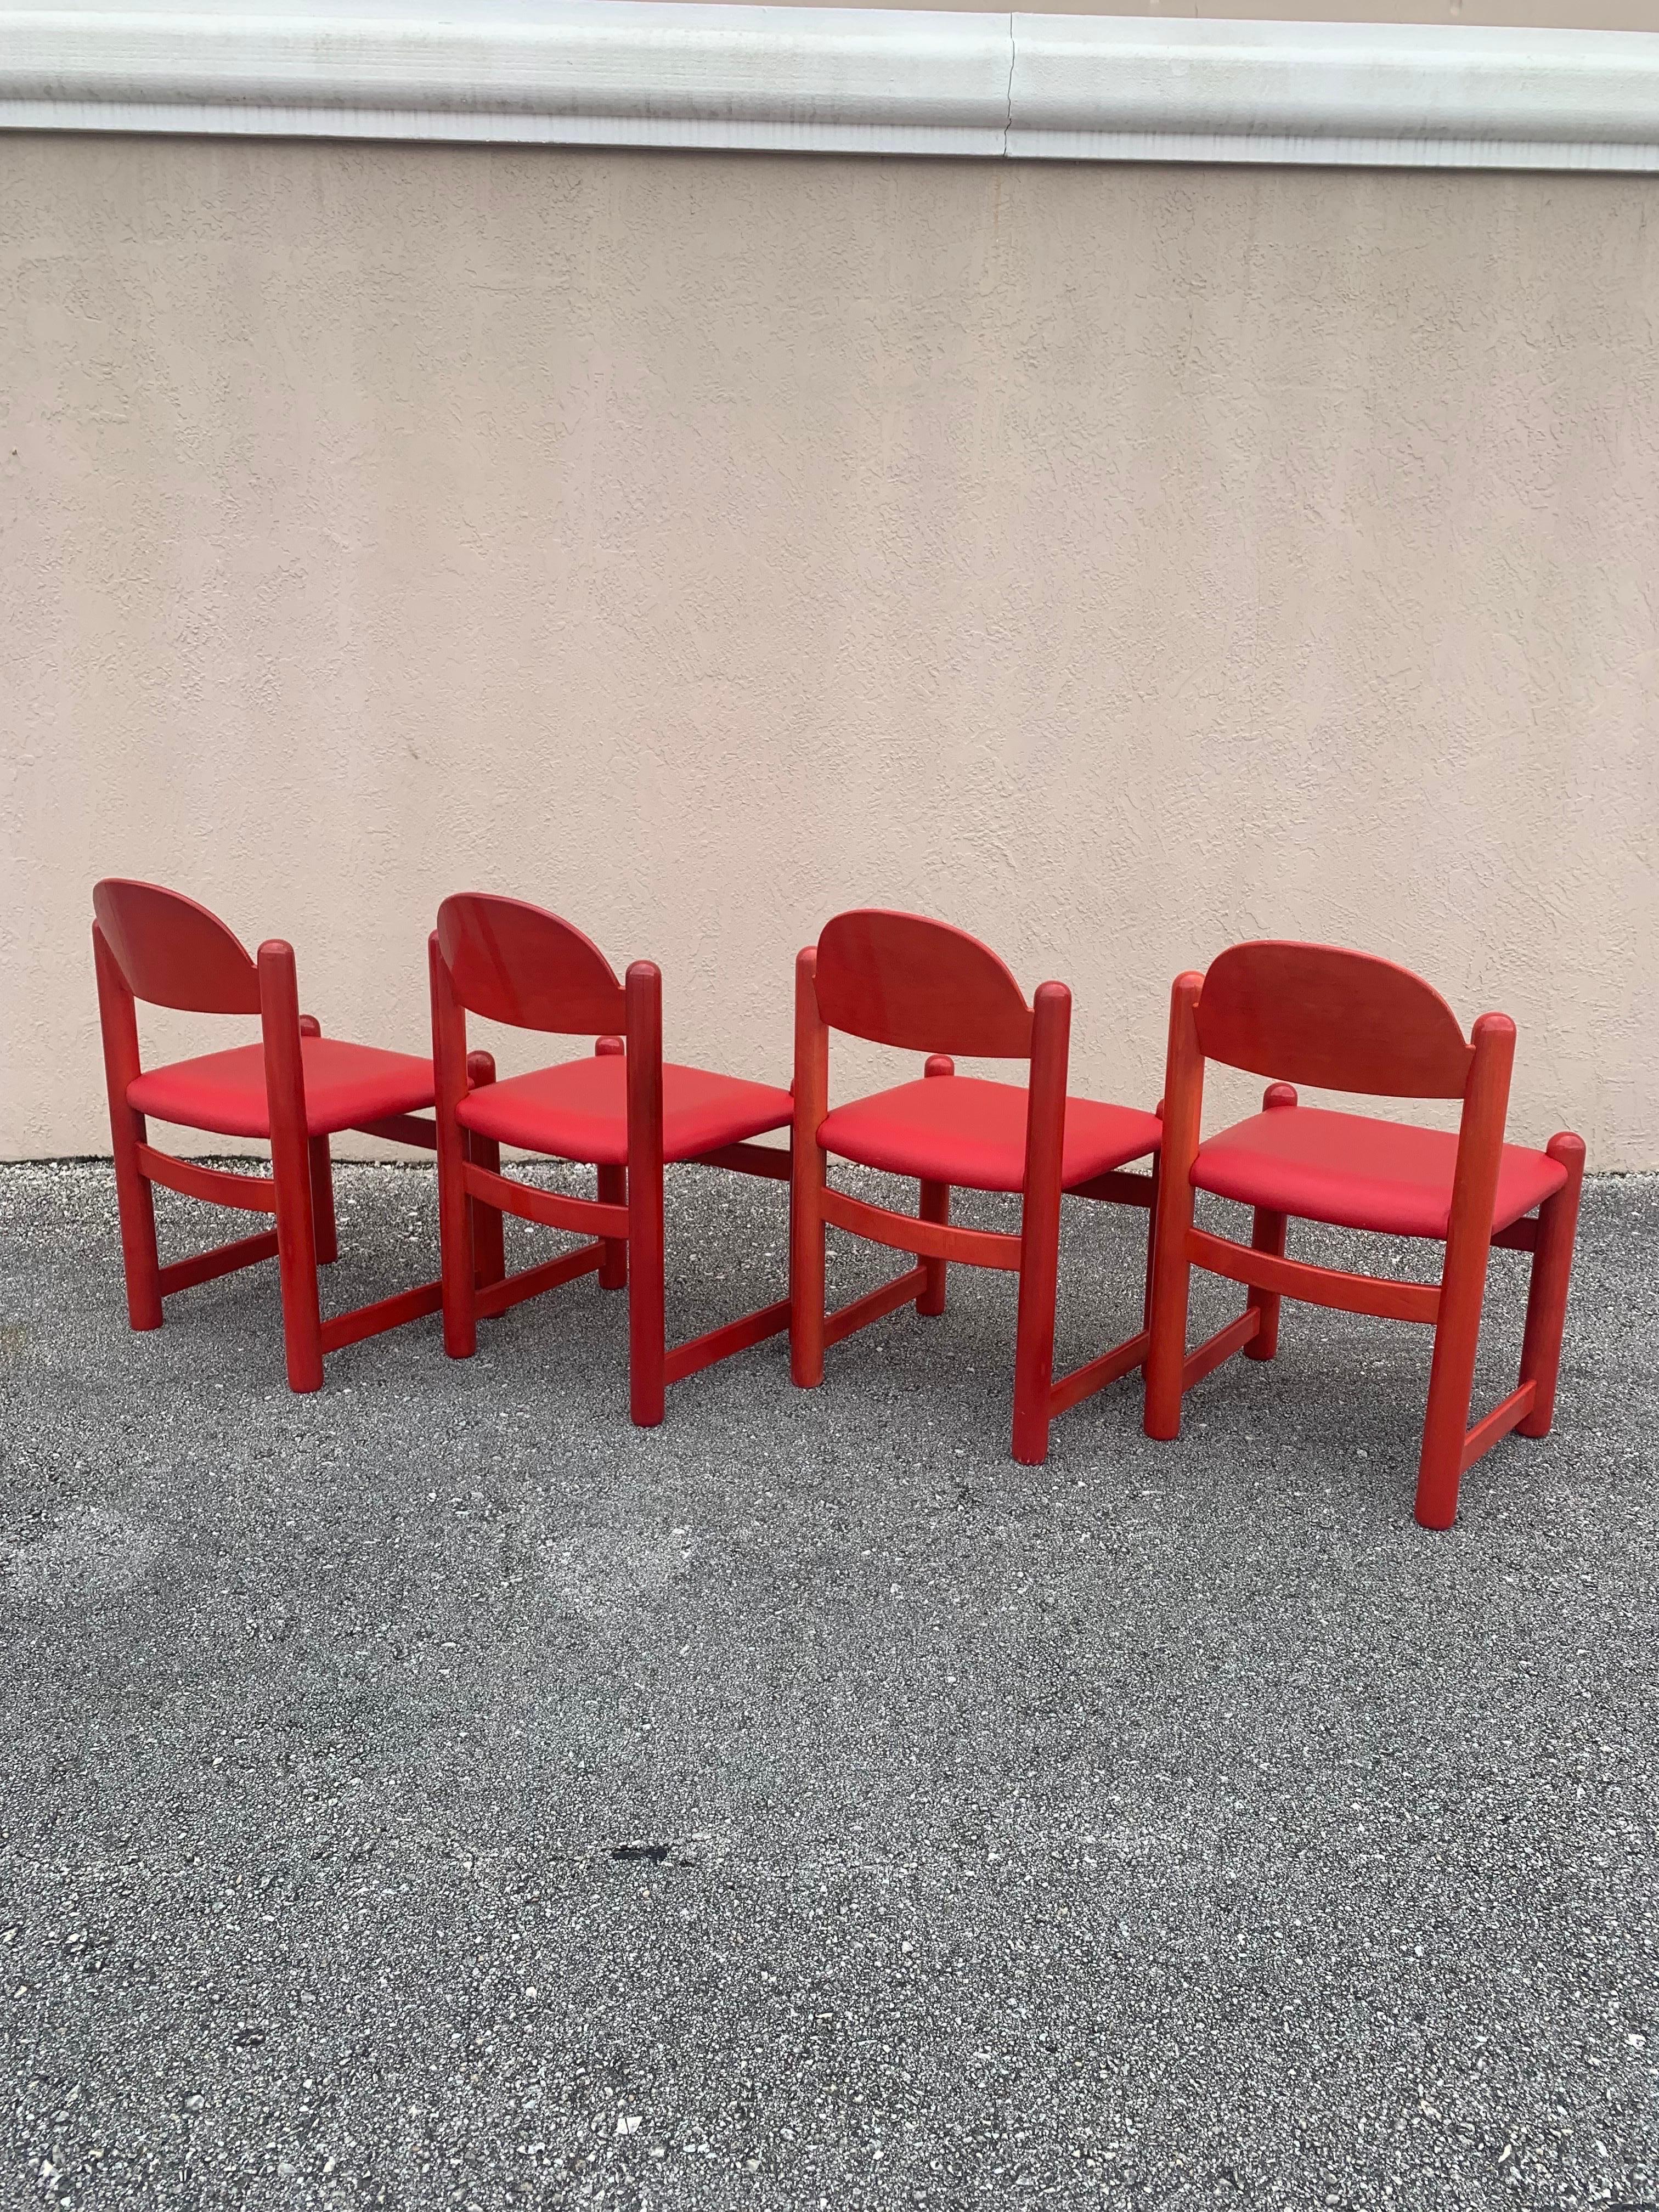 Hank Loewenstein Oak and Leather Chairs in Red, 1970s In Good Condition For Sale In Boynton Beach, FL